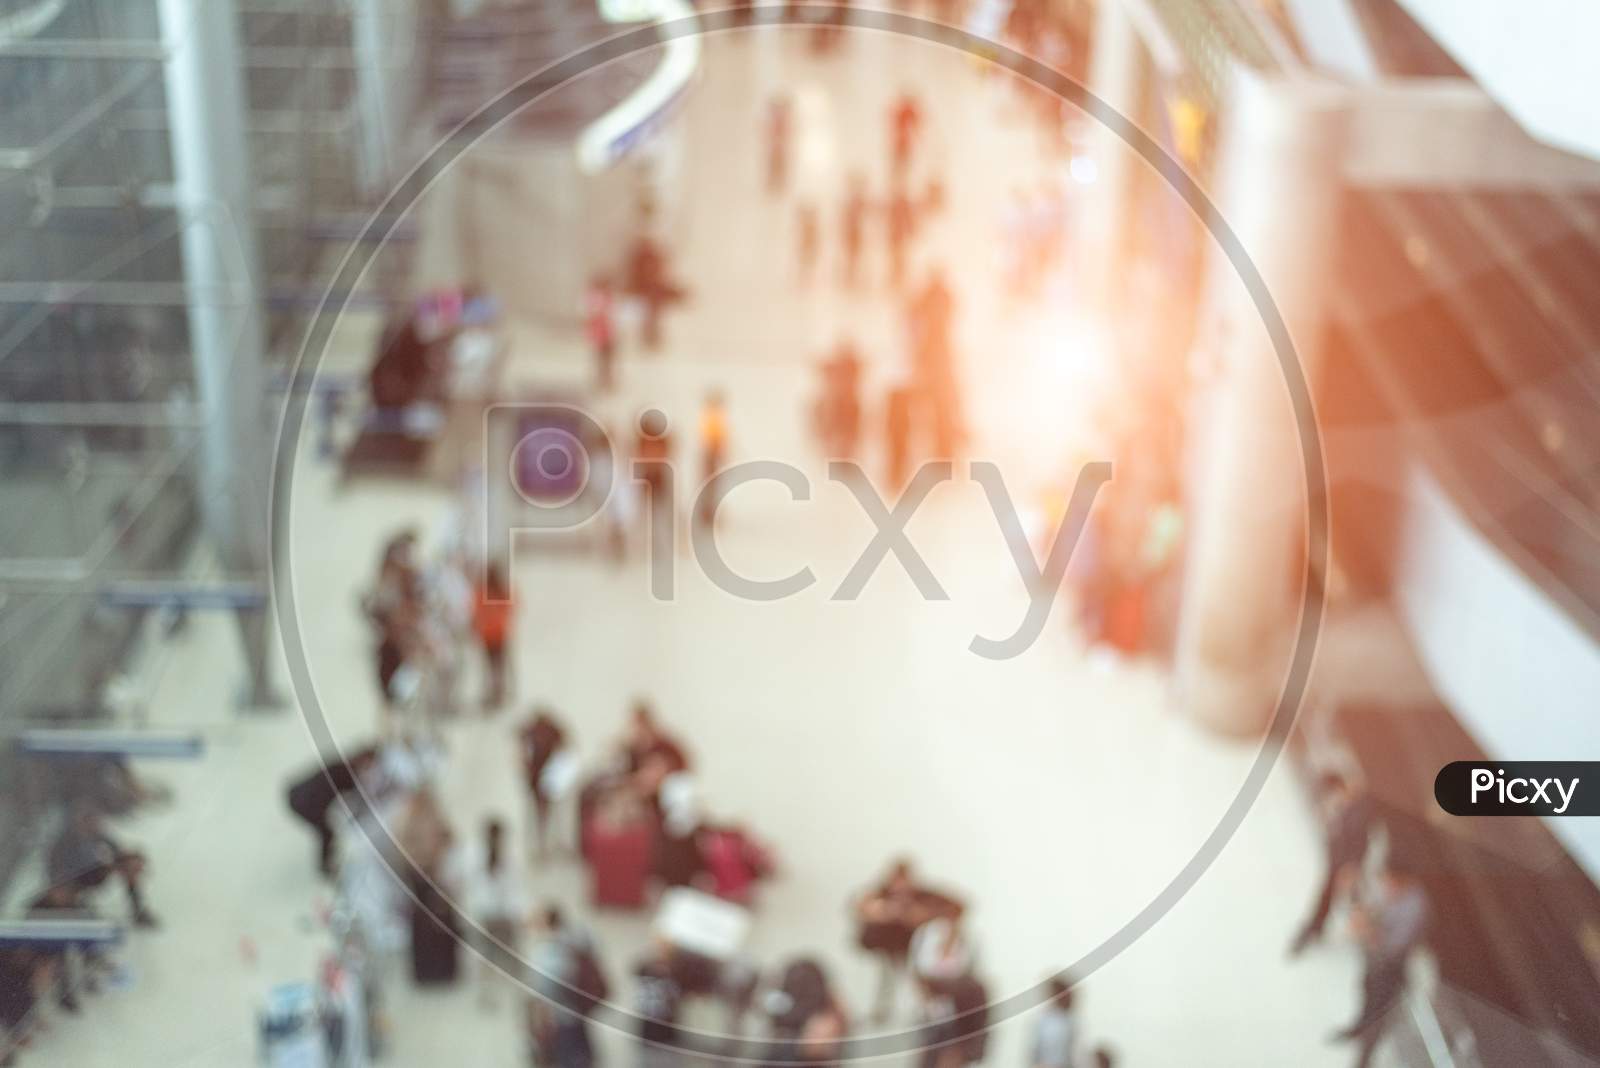 Blurry Background Of Airport Terminal And Convention Hall With Crowd People. Orange Sun Light Element. Business And Travel Concept. Abstract Background Theme.